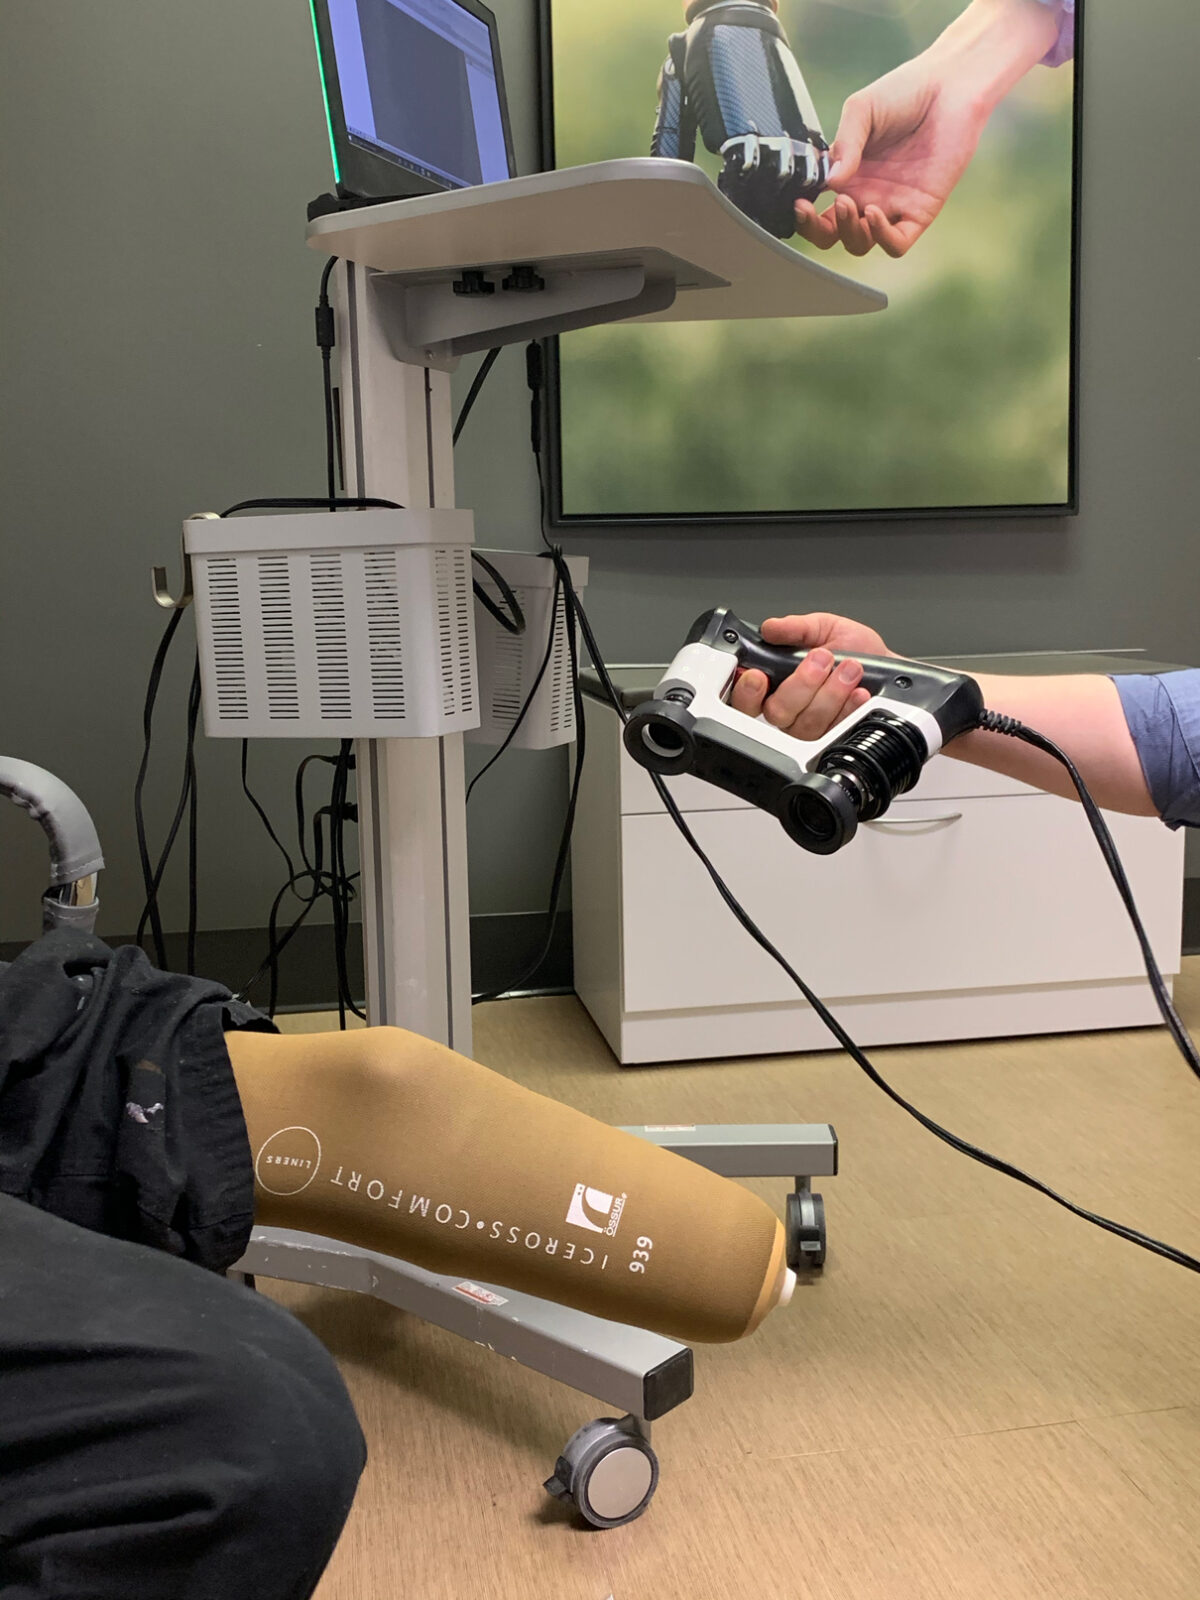 Digital Scanning of a lower extremity amputee's residual limb